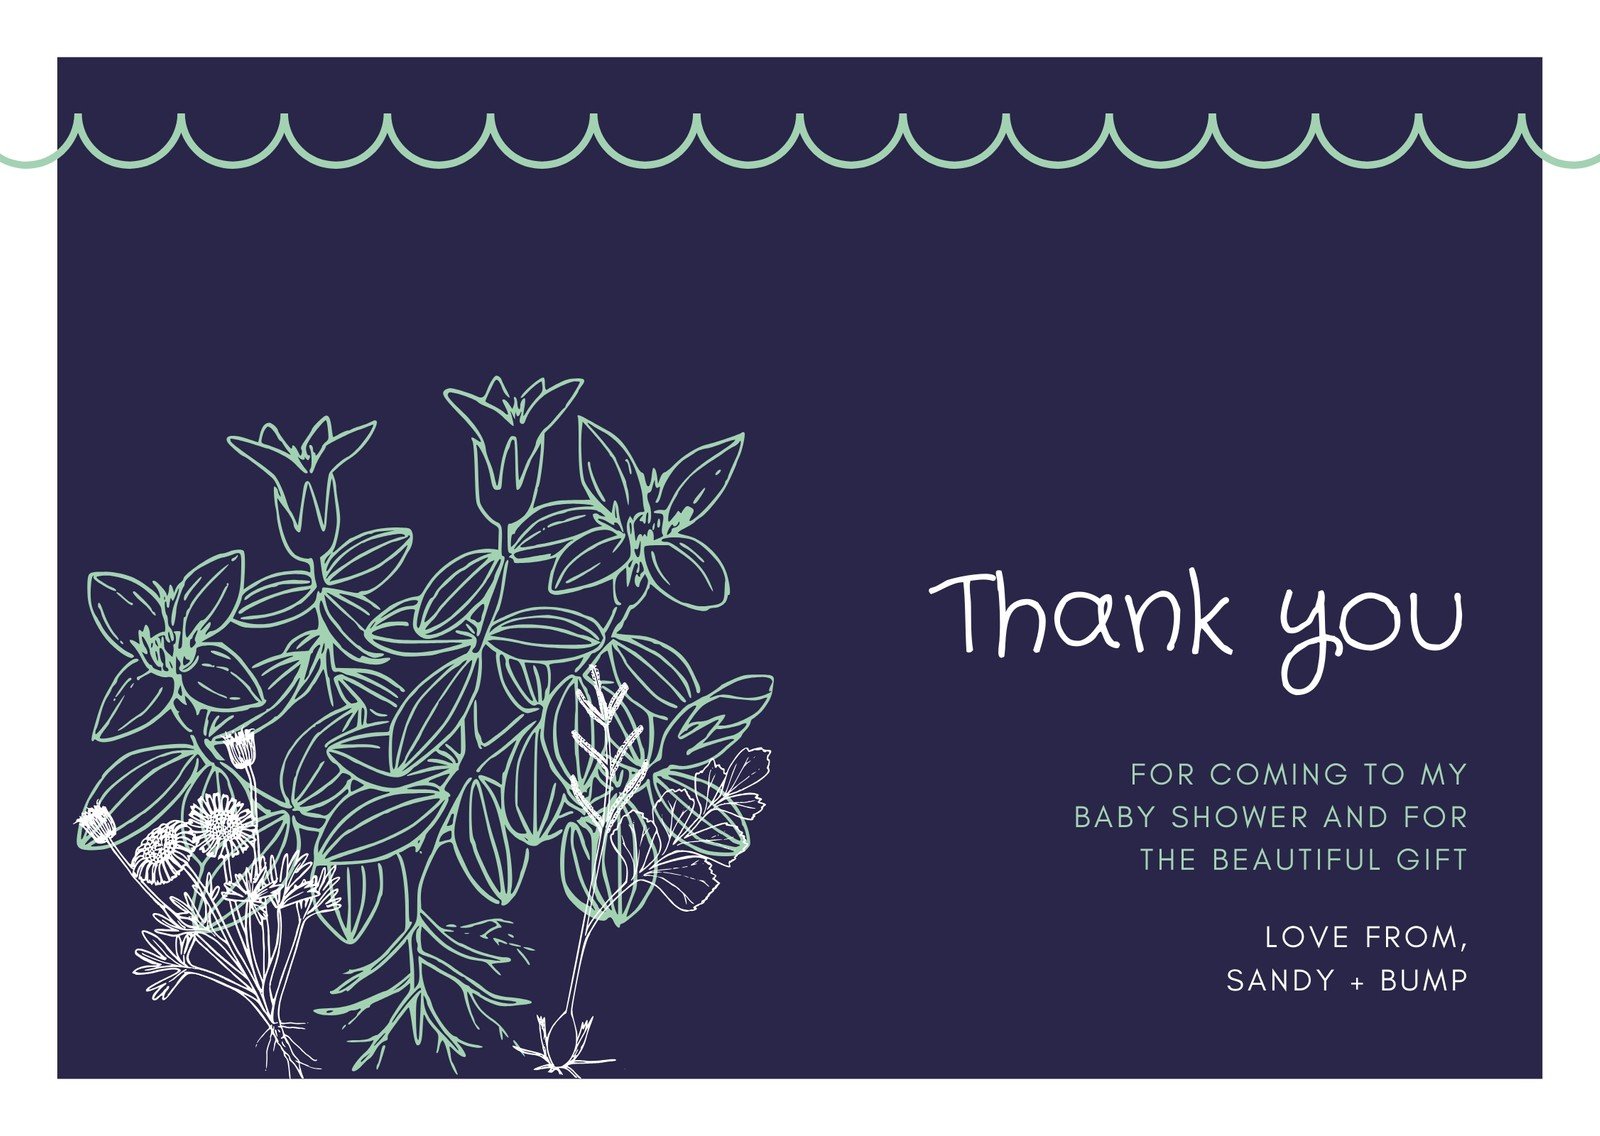 Customize 23+ Baby Shower Thank You Cards Templates Online - Canva Inside Template For Baby Shower Thank You Cards